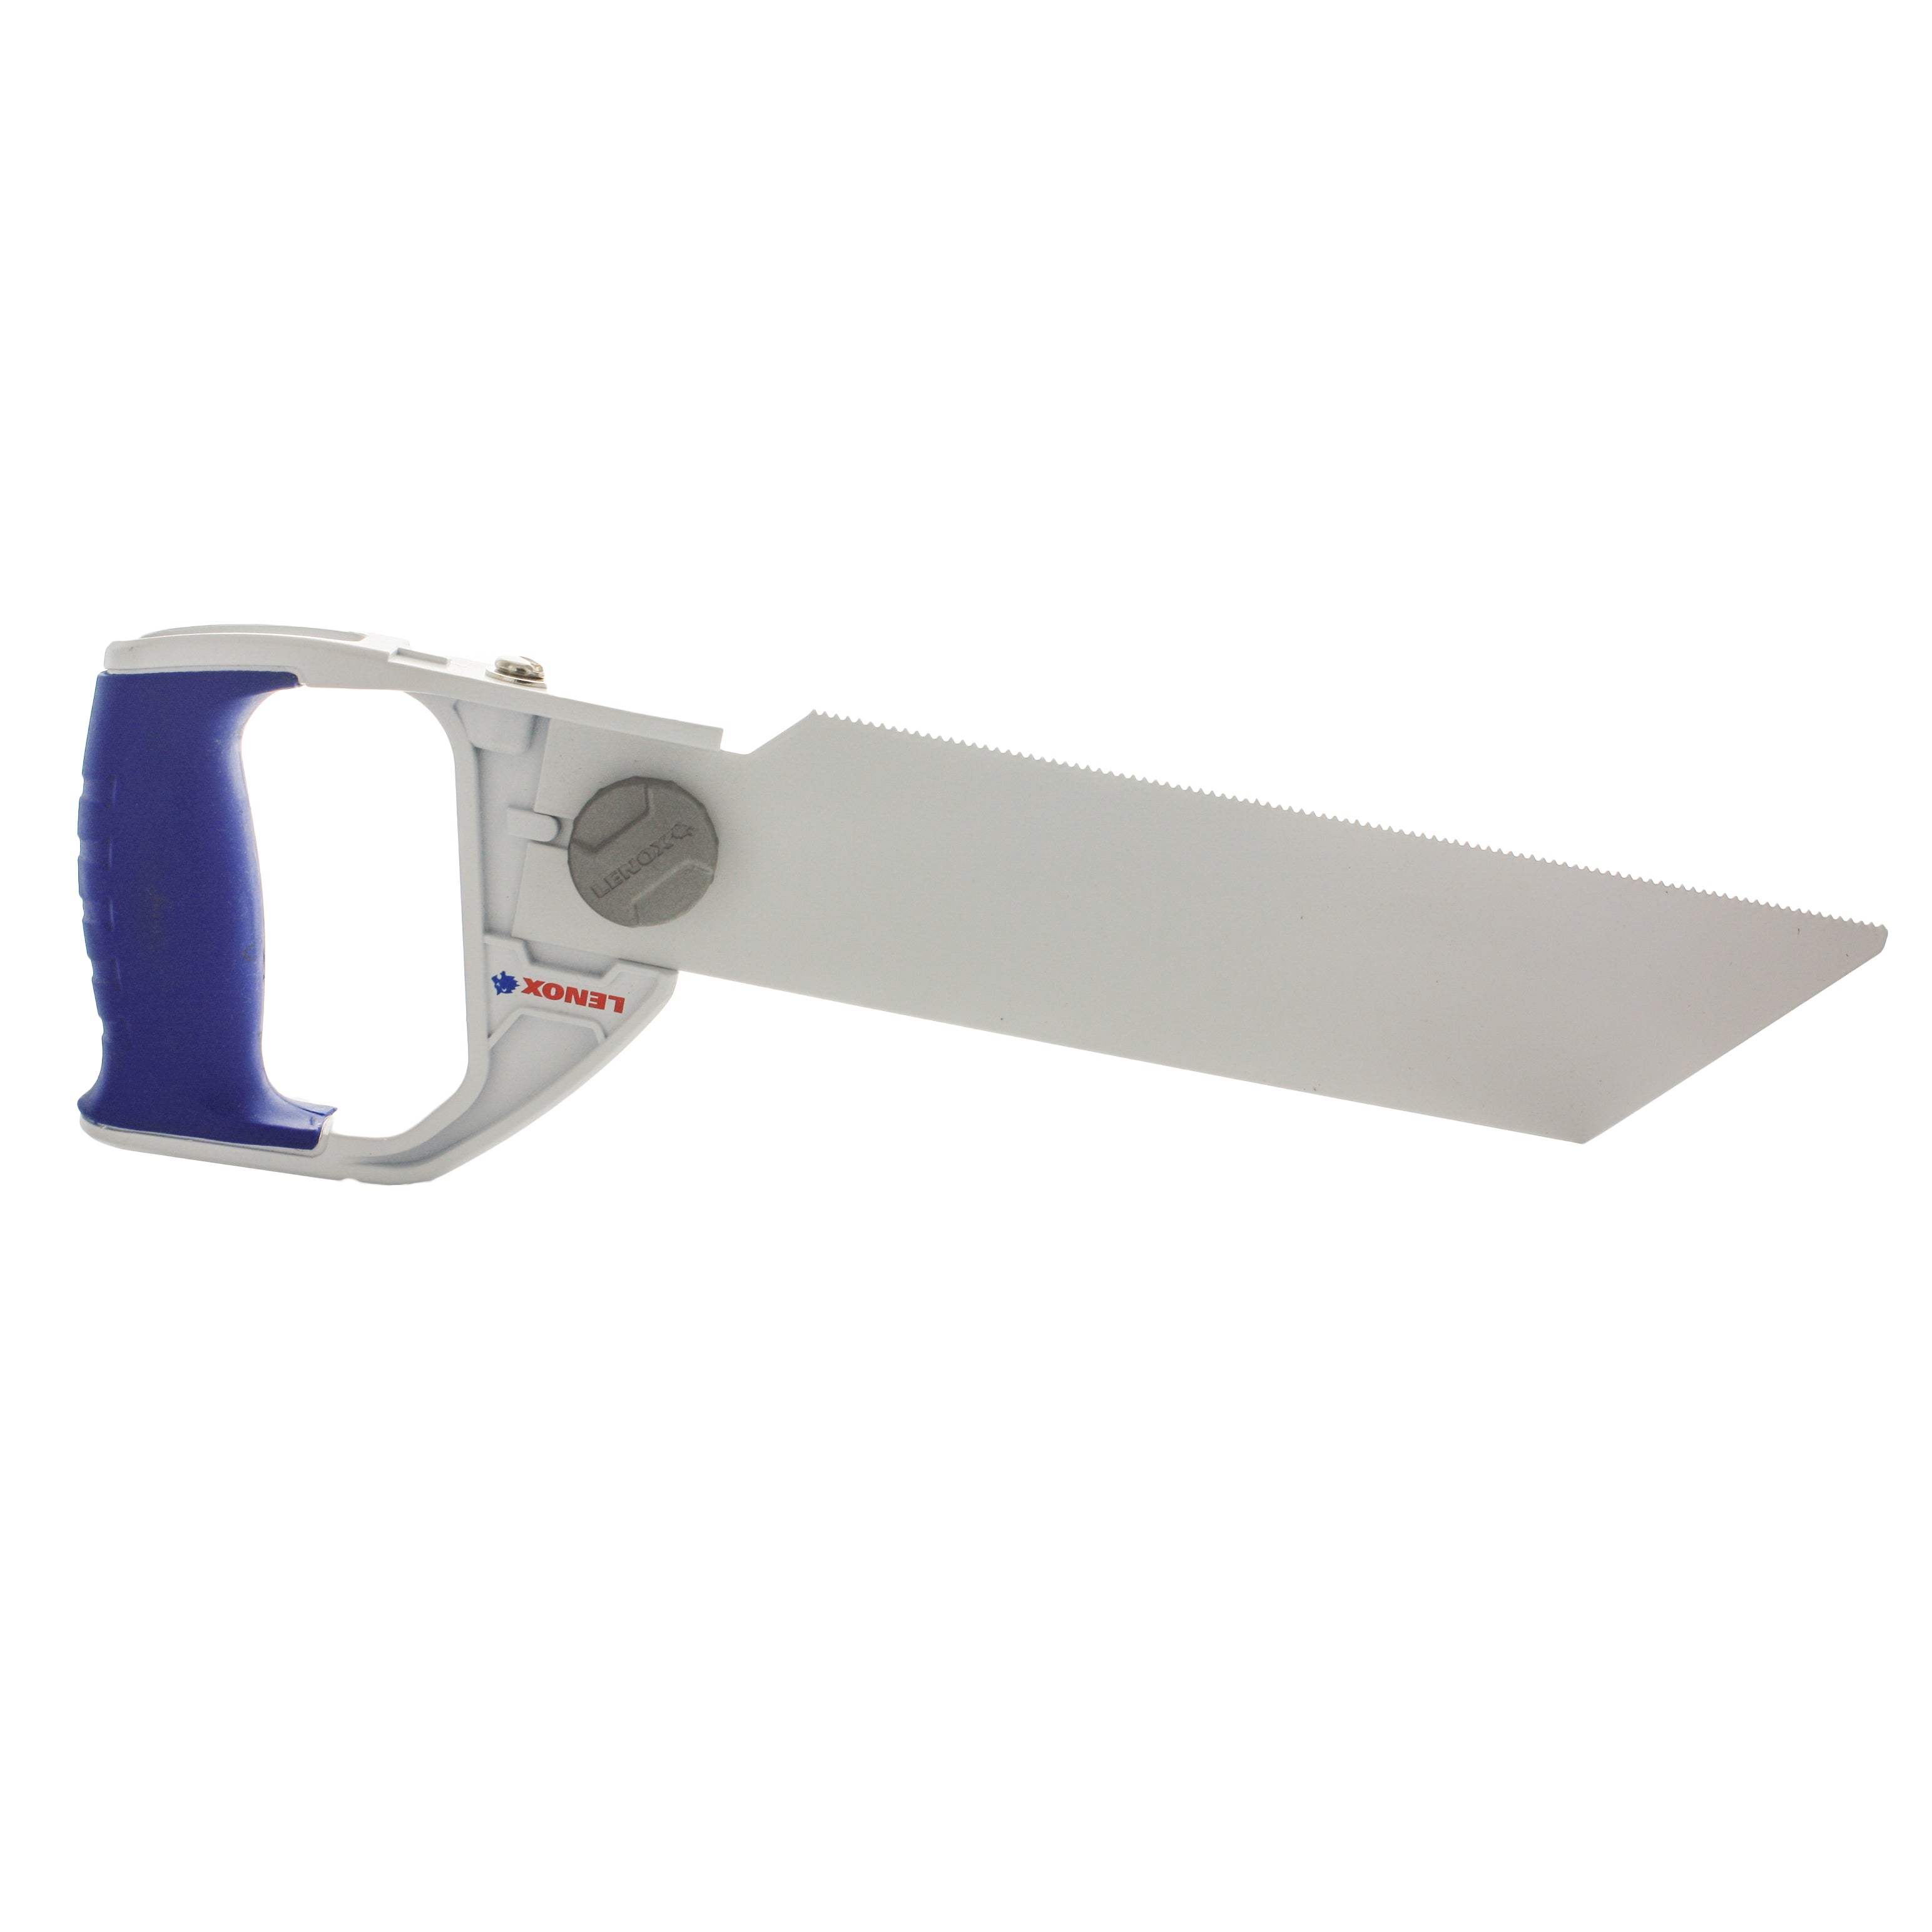 Christy's - HSF-180 - 18" Pvc/Abs Plastic Pipe Handsaw